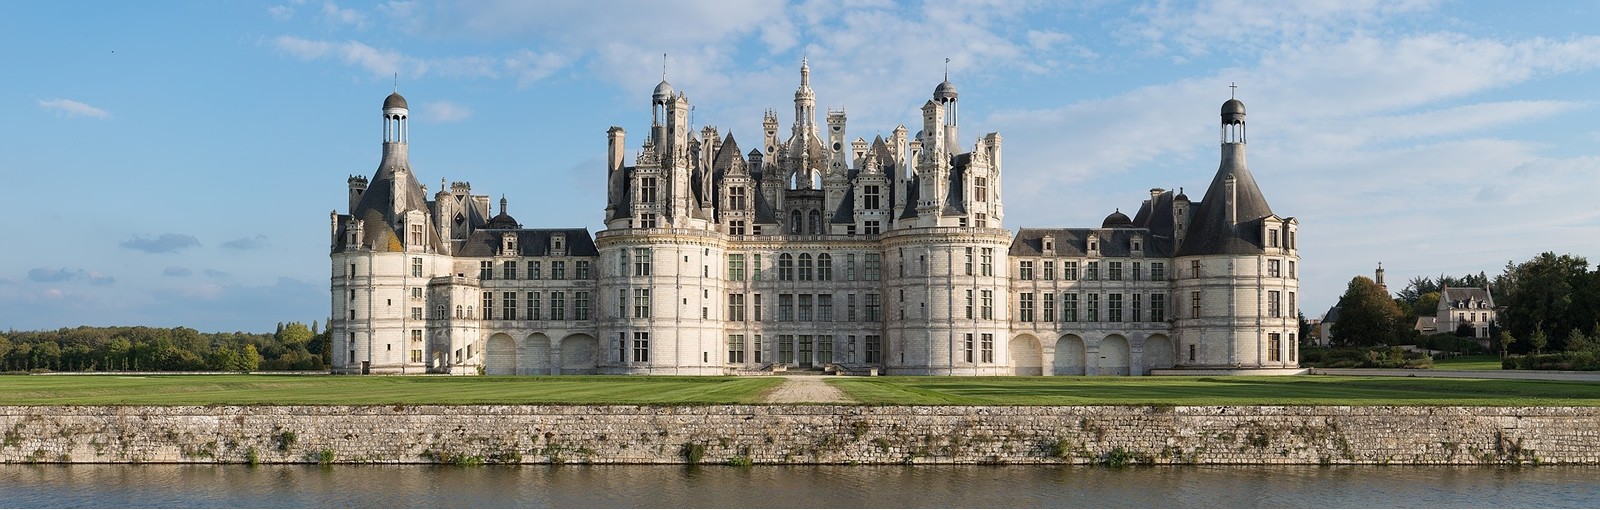 Tours Normandy - Castles of the Loire valley - Multi-regional - Multiday tours from Paris